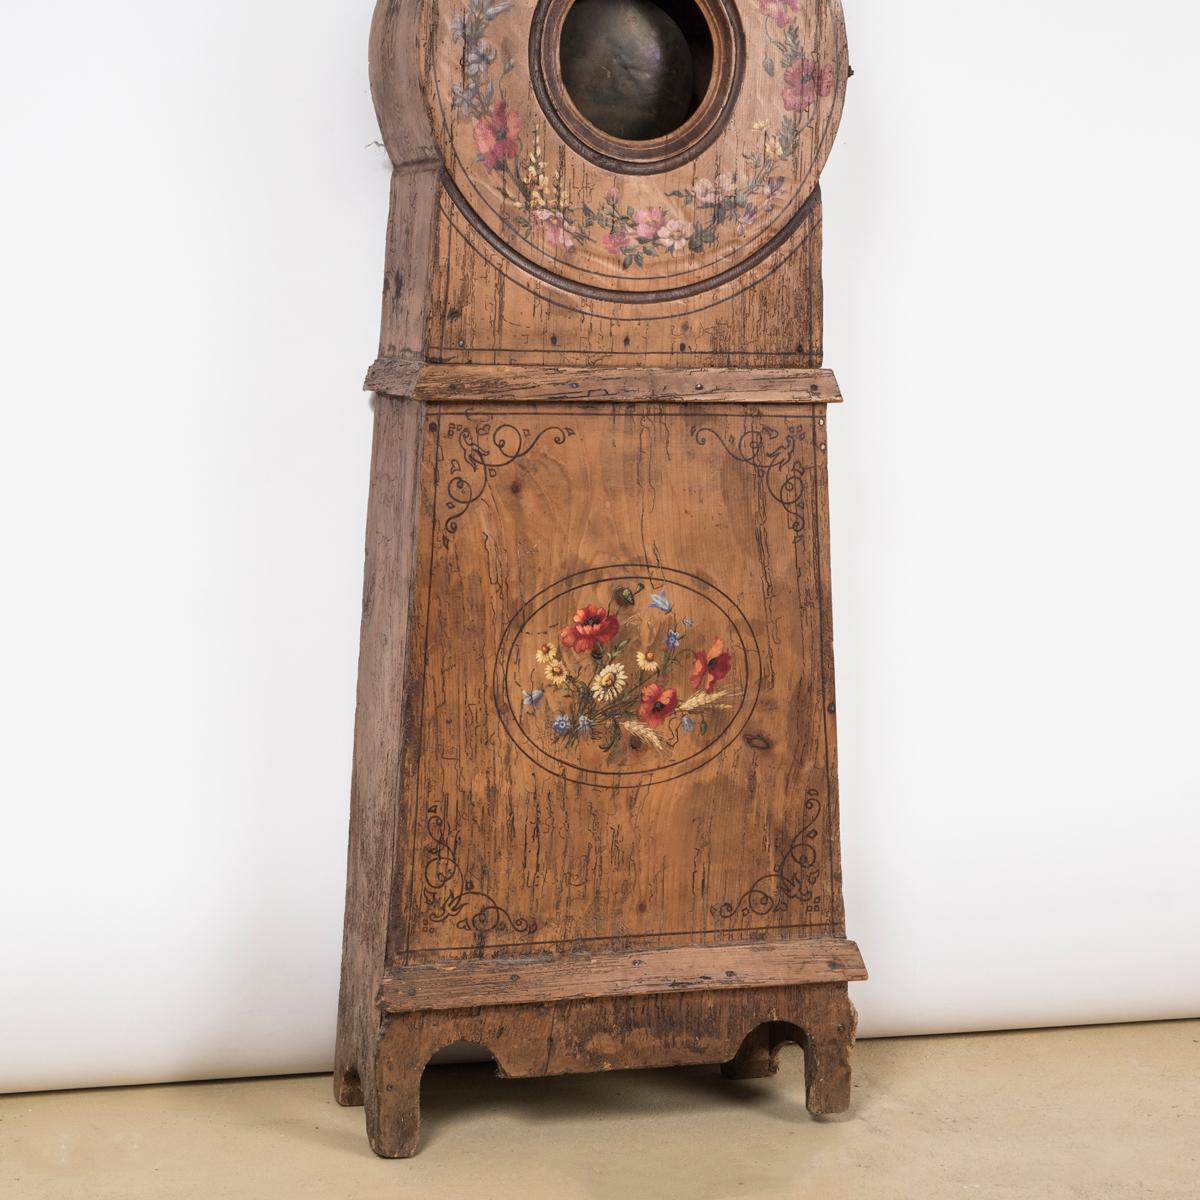 Antique French Provincial Tall Case Clock In a Painted Case, ca. 1870 For Sale 1